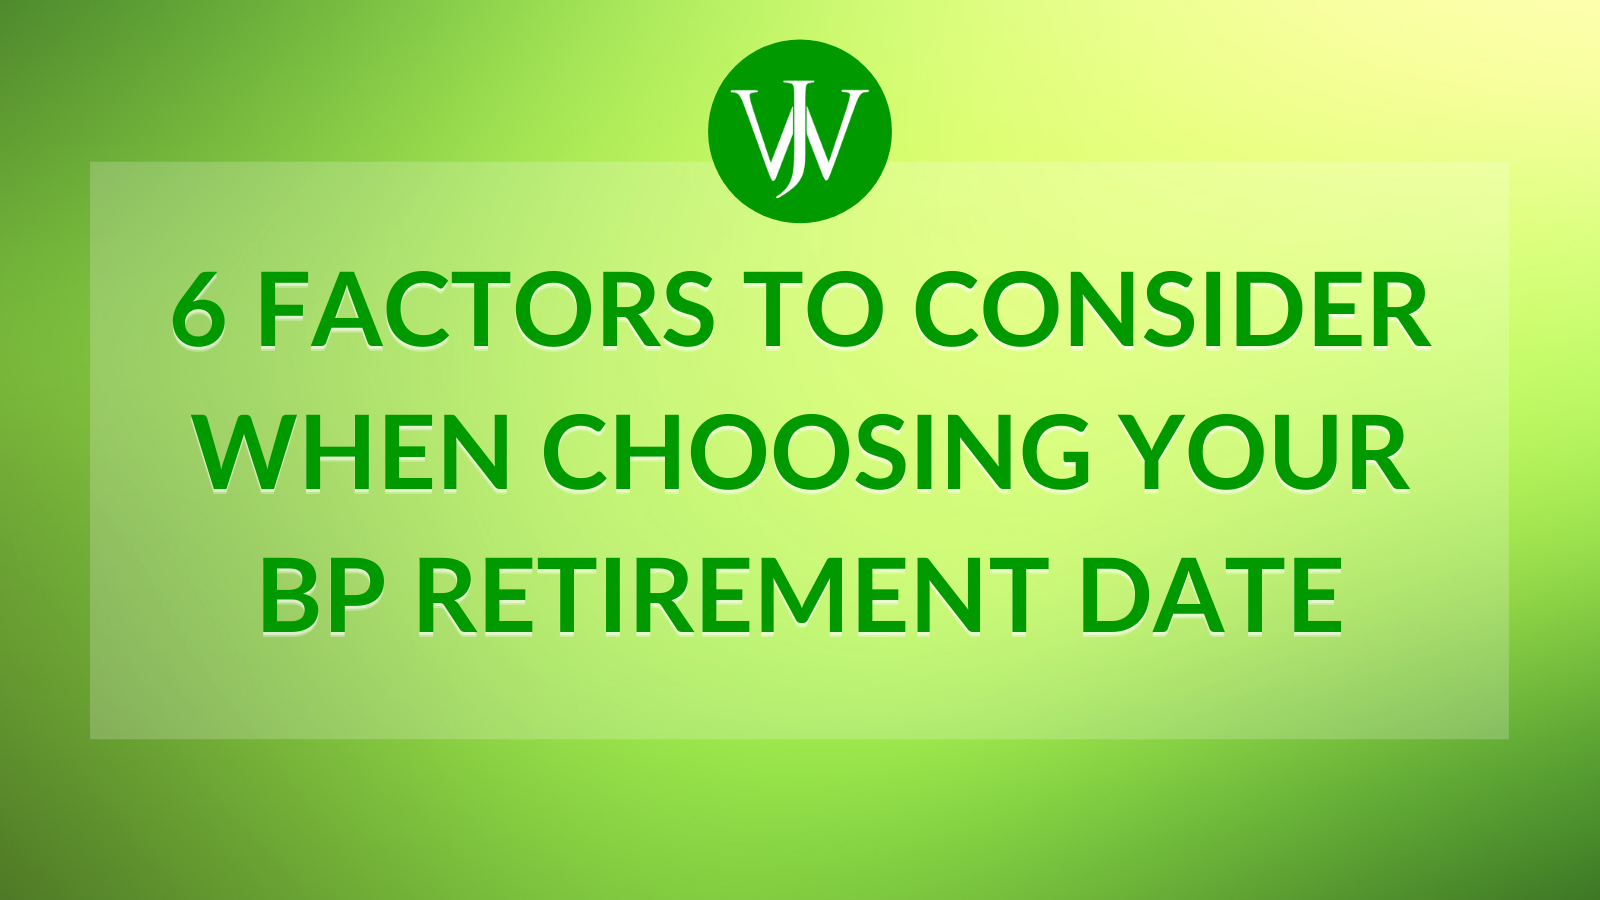 How to Determine The Best Date for a BP Retirement